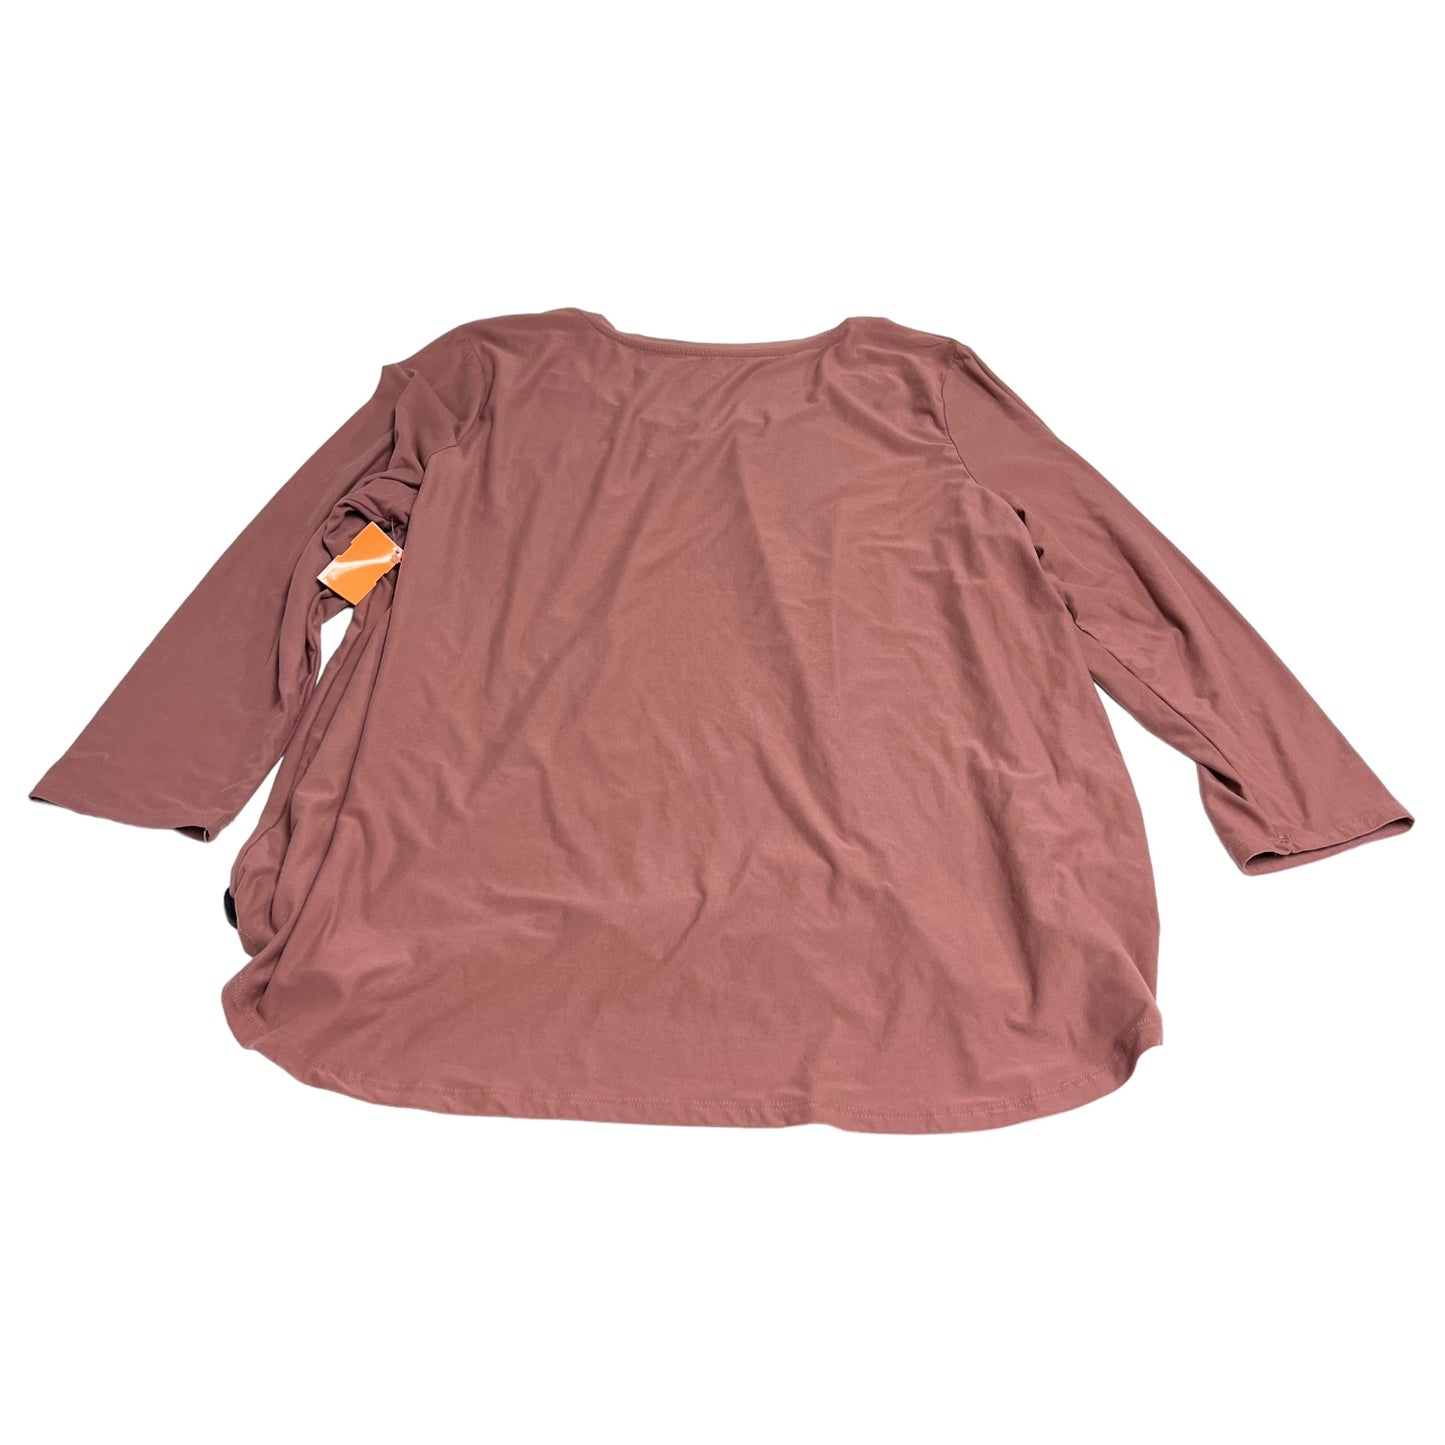 Top Long Sleeve Basic By Pink Rose  Size: 3x